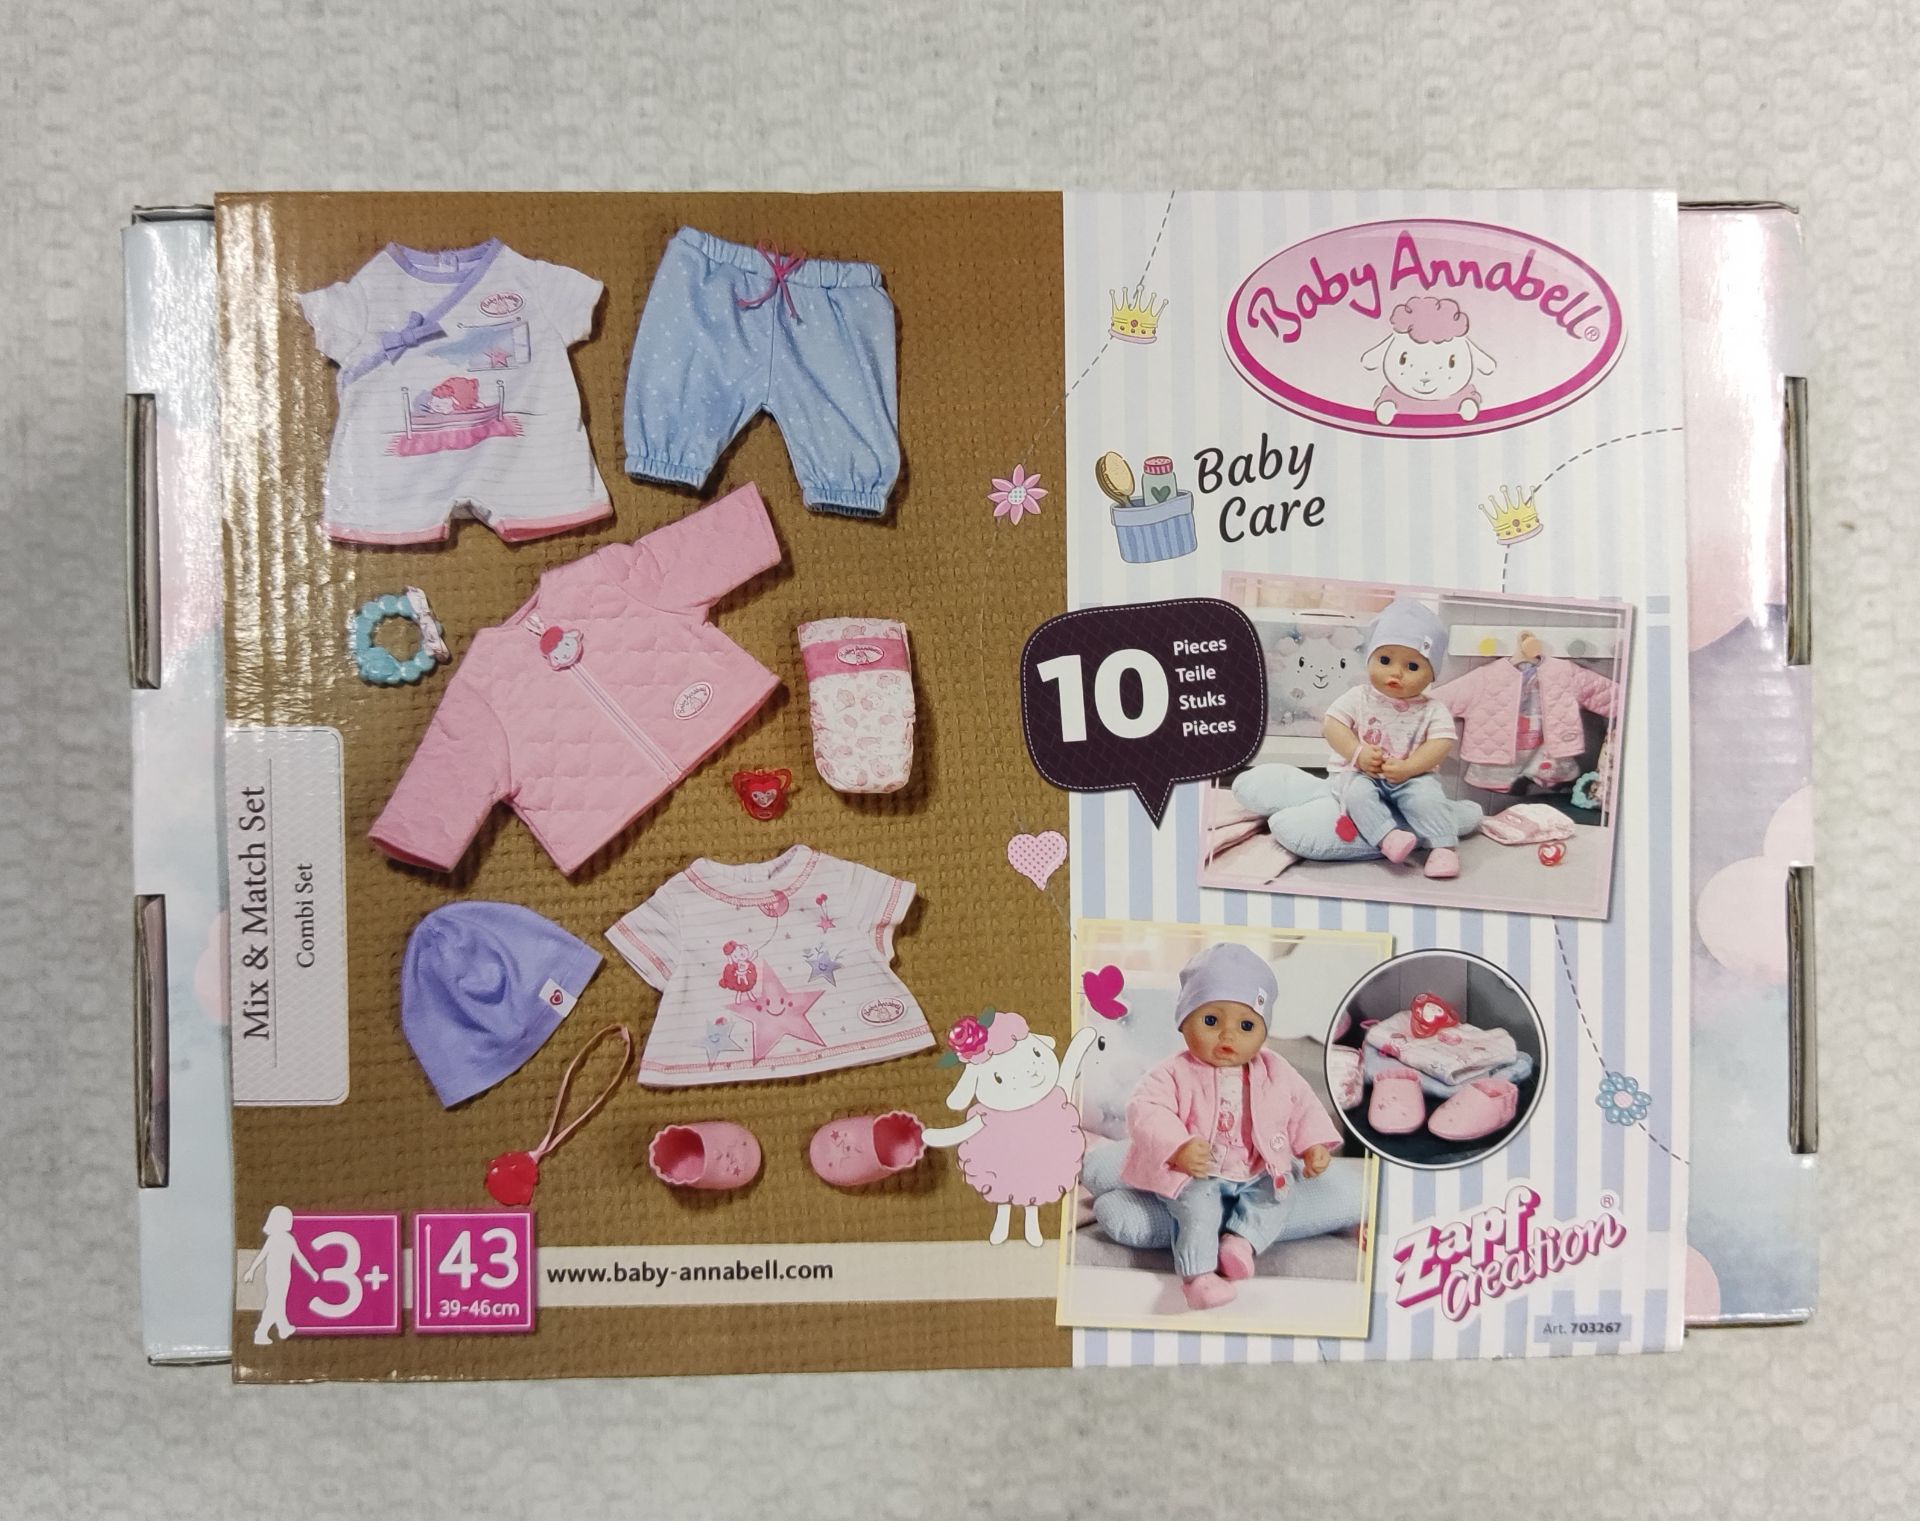 1 x Baby Annabell Mix & Match Combi Set - New/Boxed - Image 5 of 7